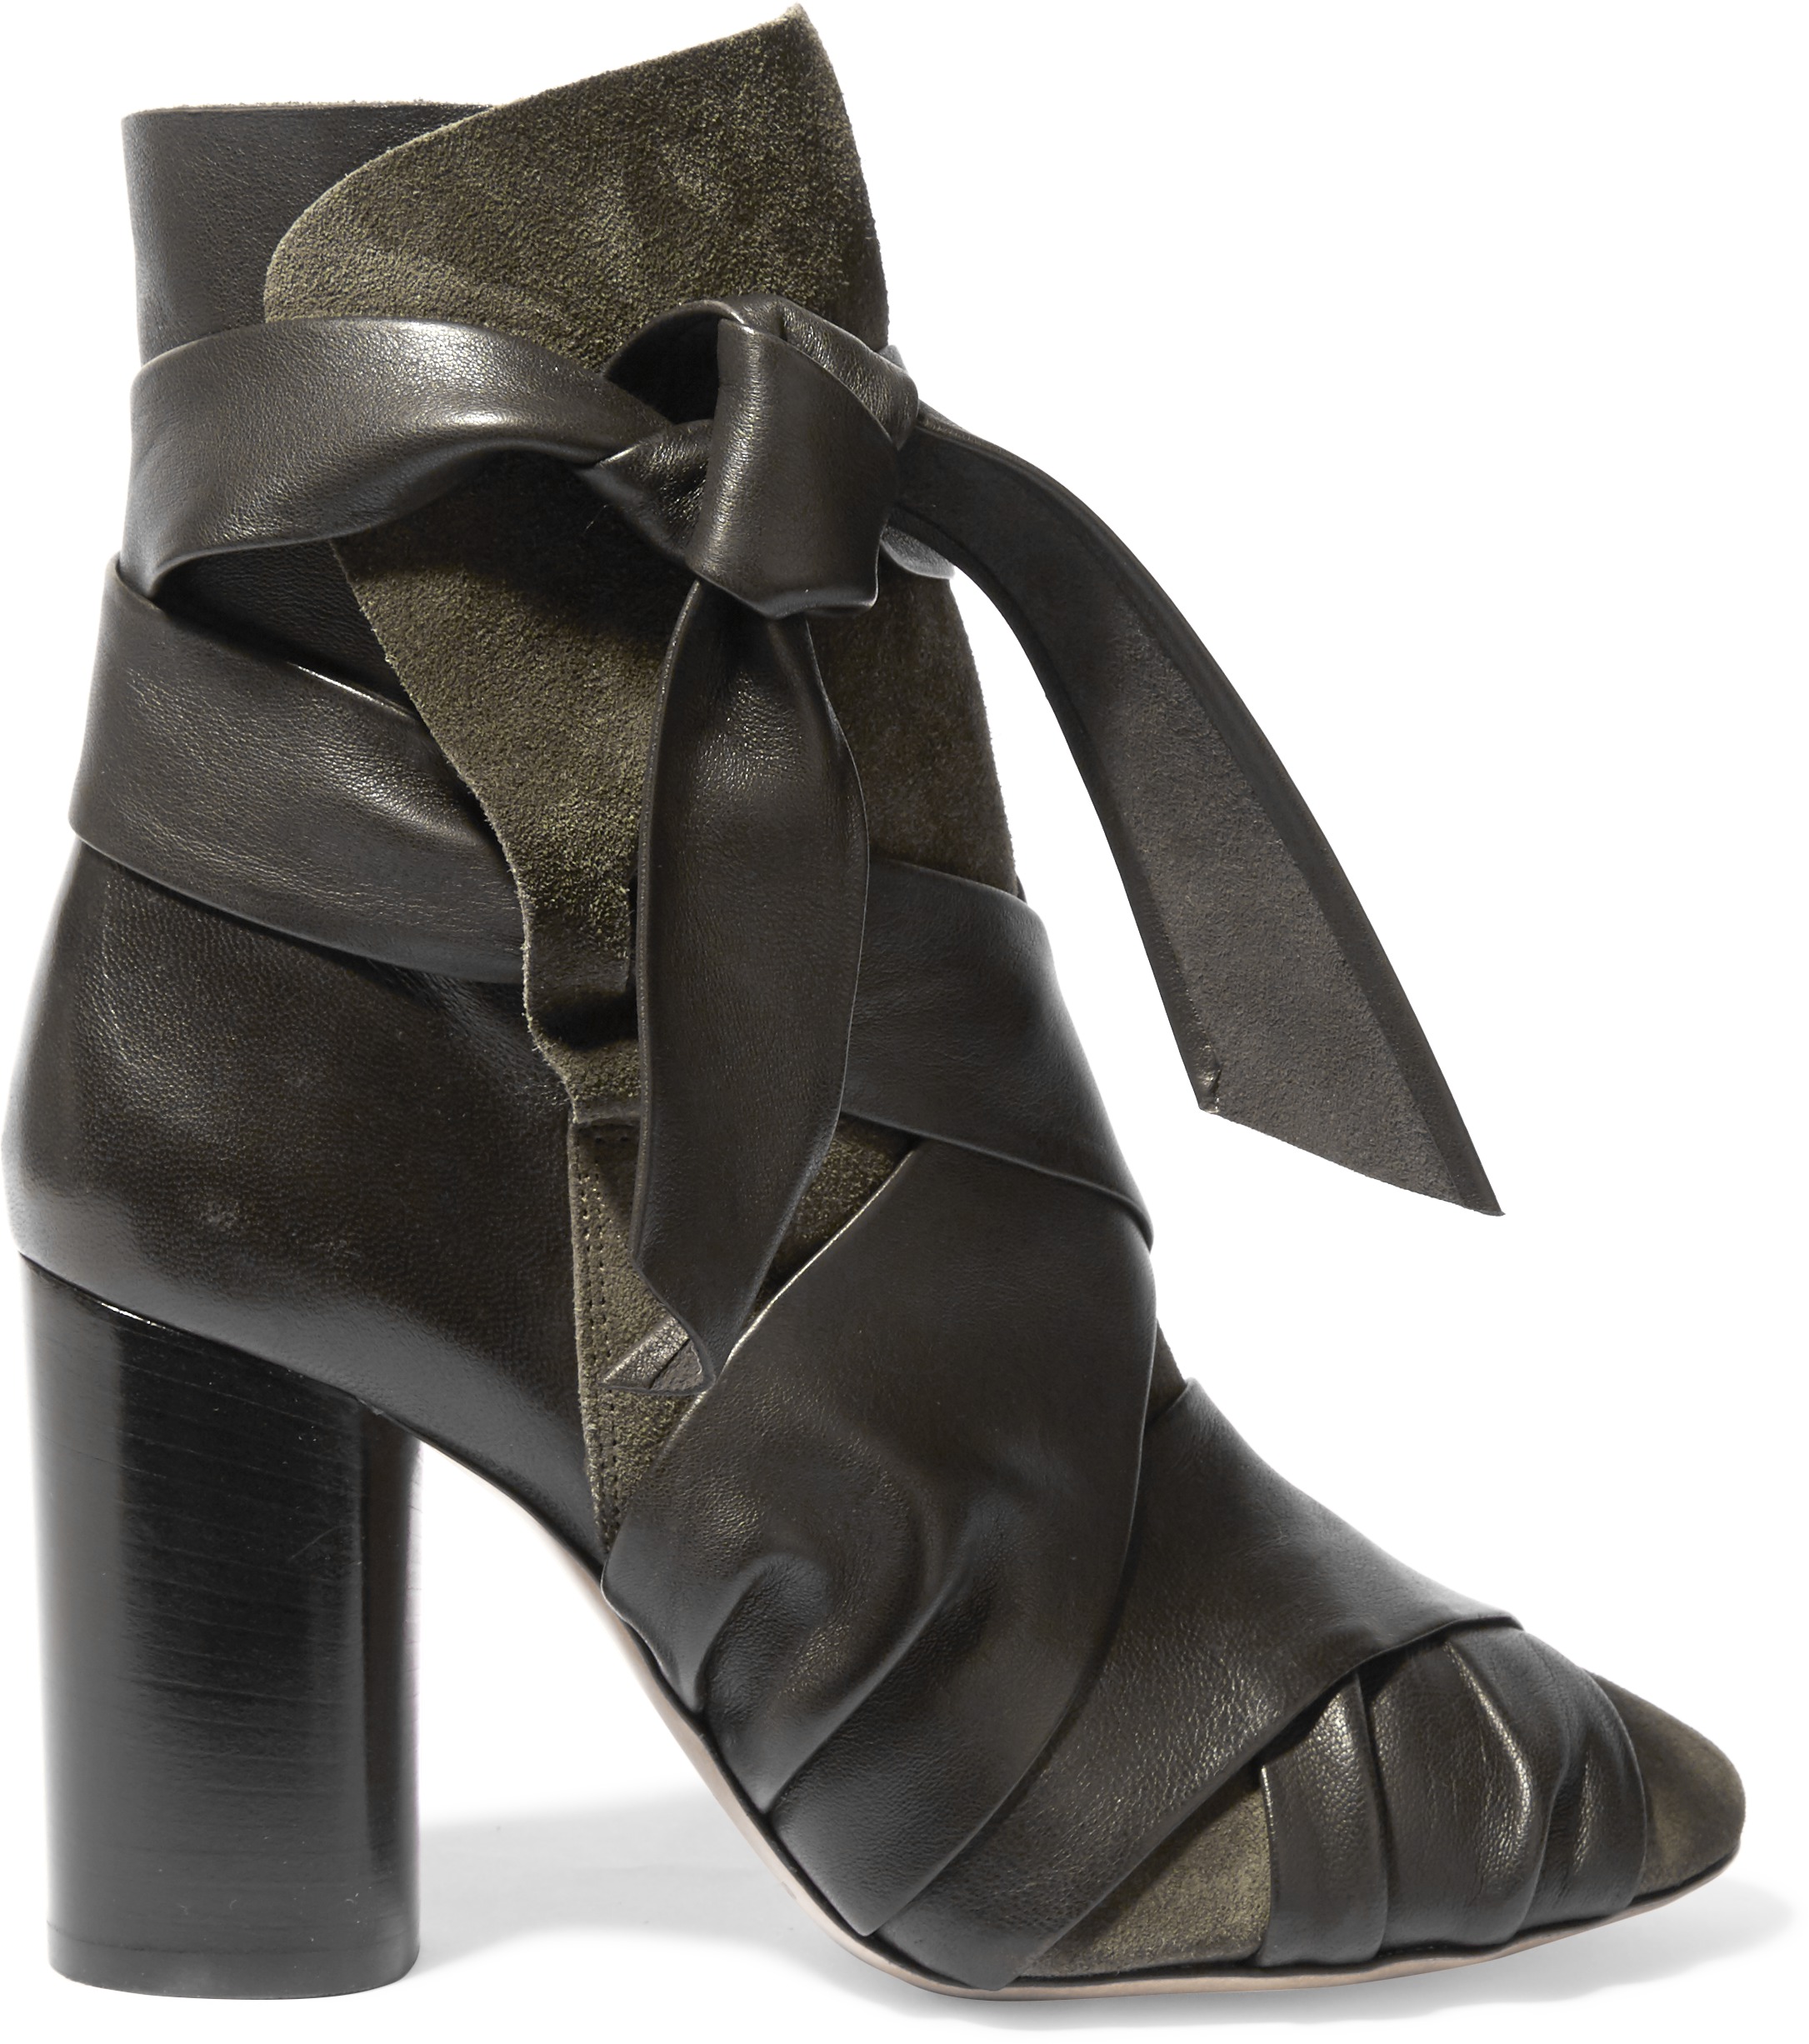 703268_ Isabel Marant_Azel suede and leather boots_THEOUTNET.COM.jpg